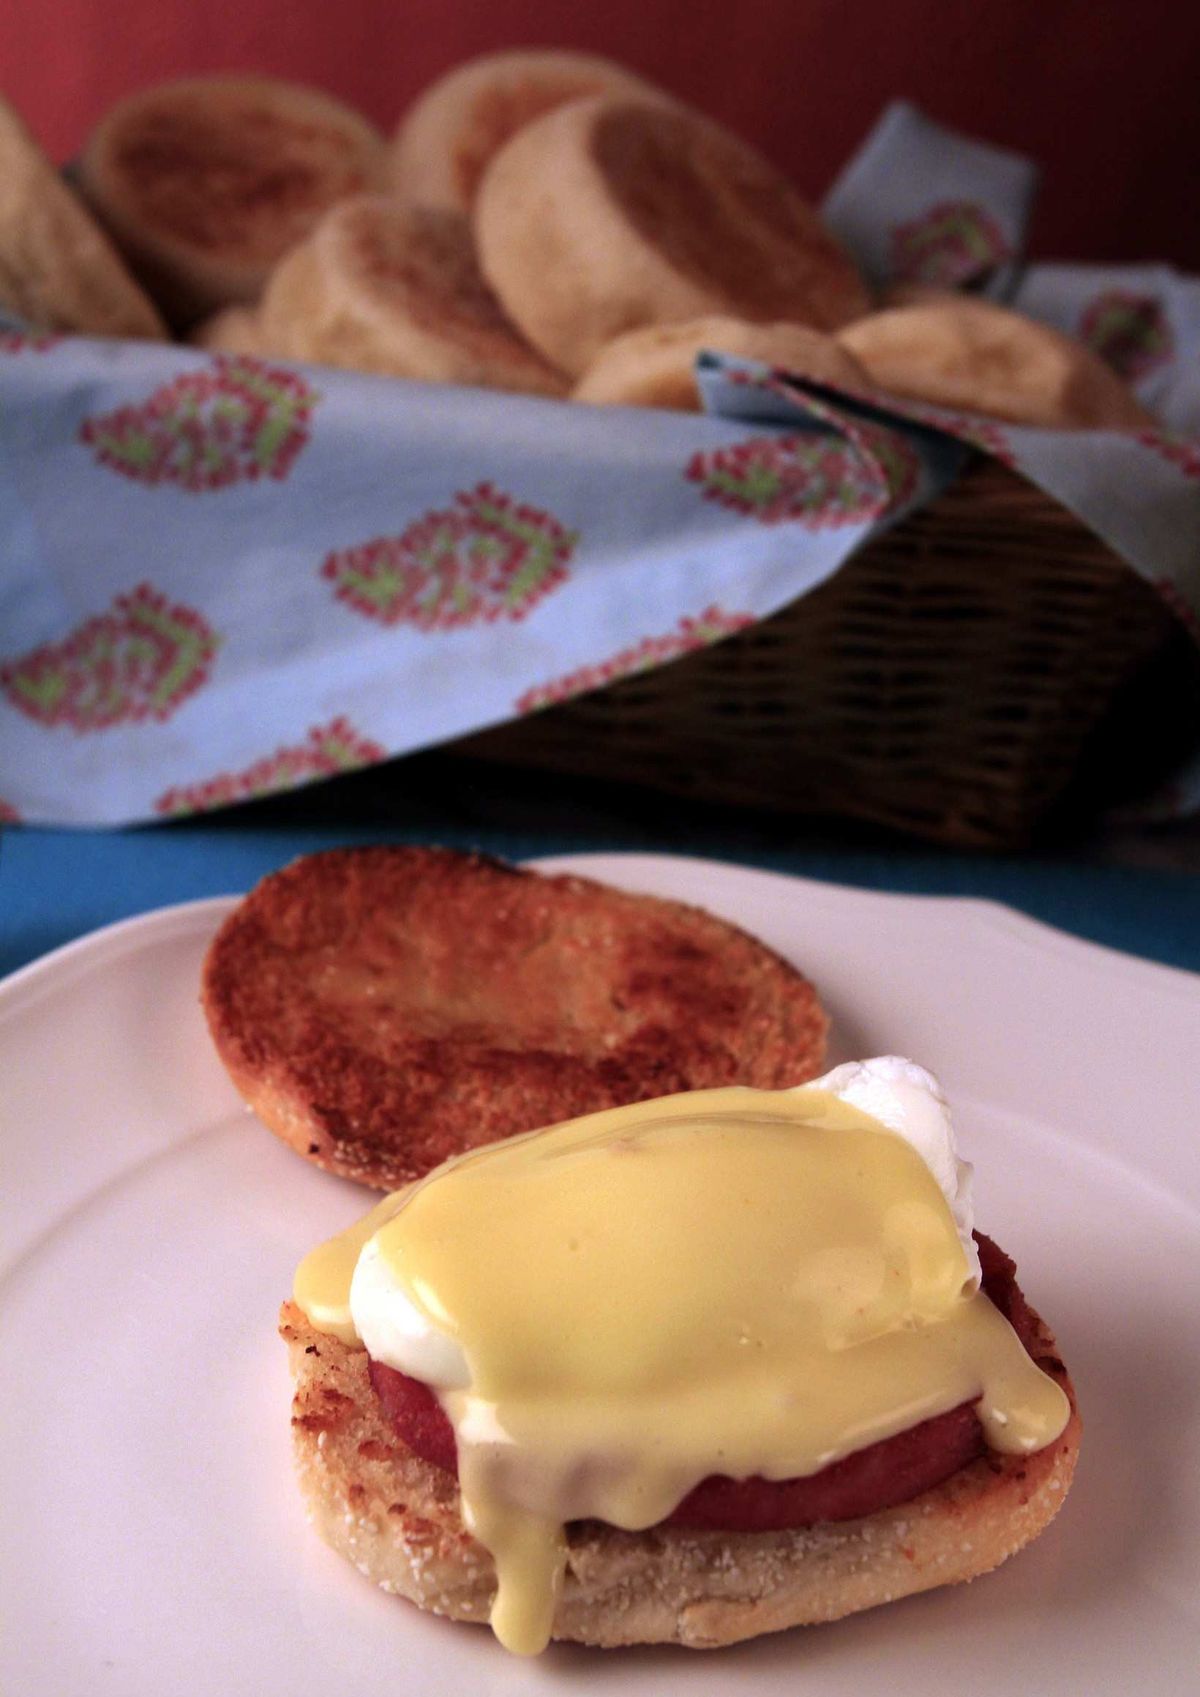 Eggs Benedict rests on an English muffin. This dish tastes better made fresh from scratch at home.  (Glenn Koenig/Los Angeles Times)